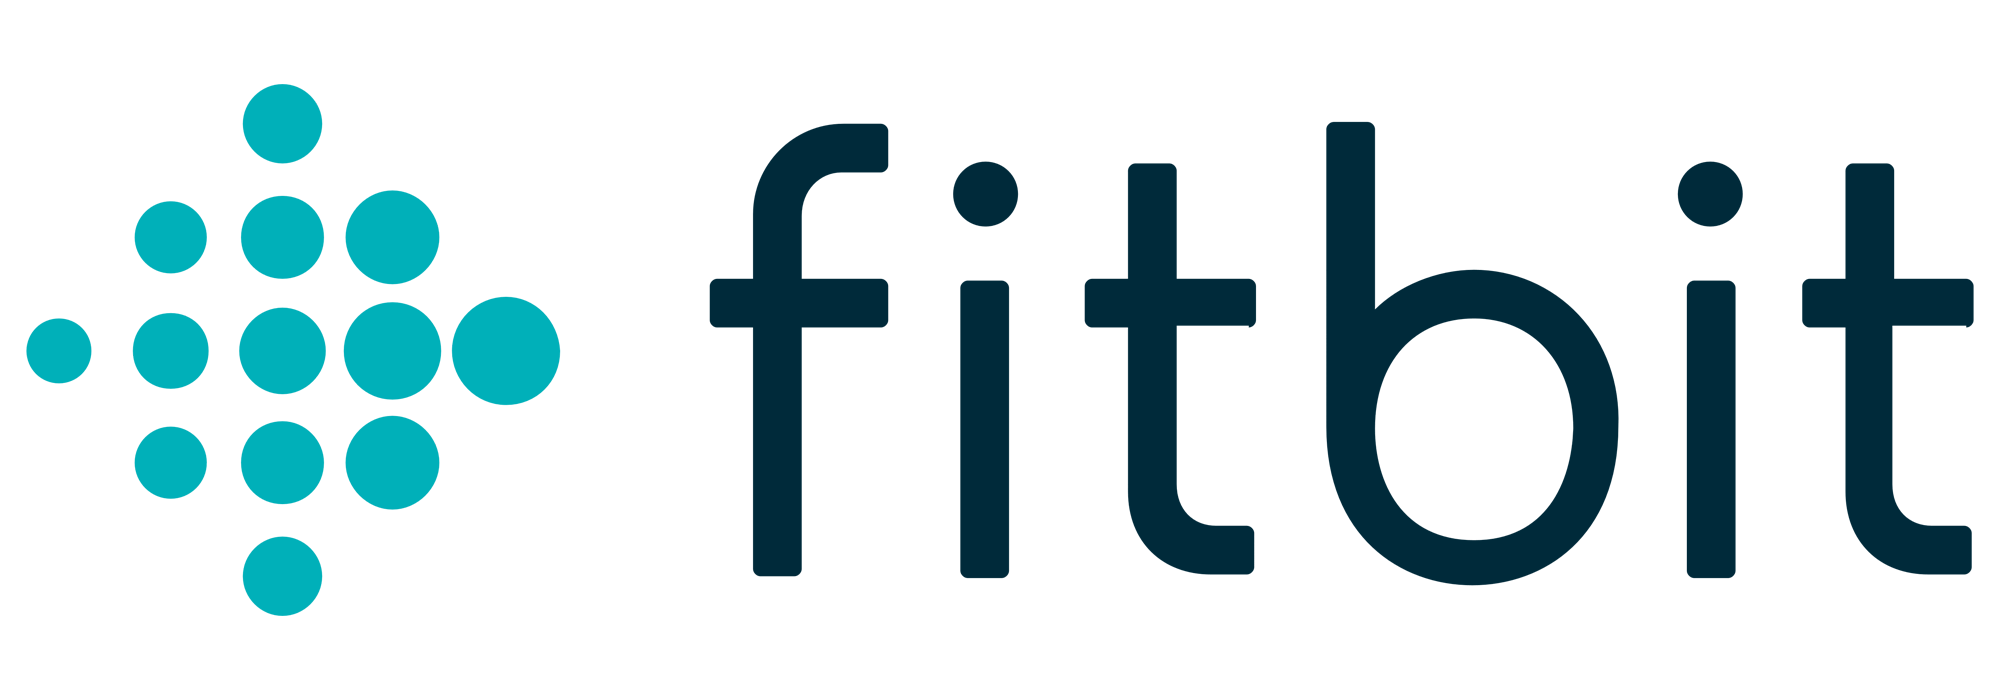 Bit Logo - Meaning Fitbit logo and symbol | history and evolution